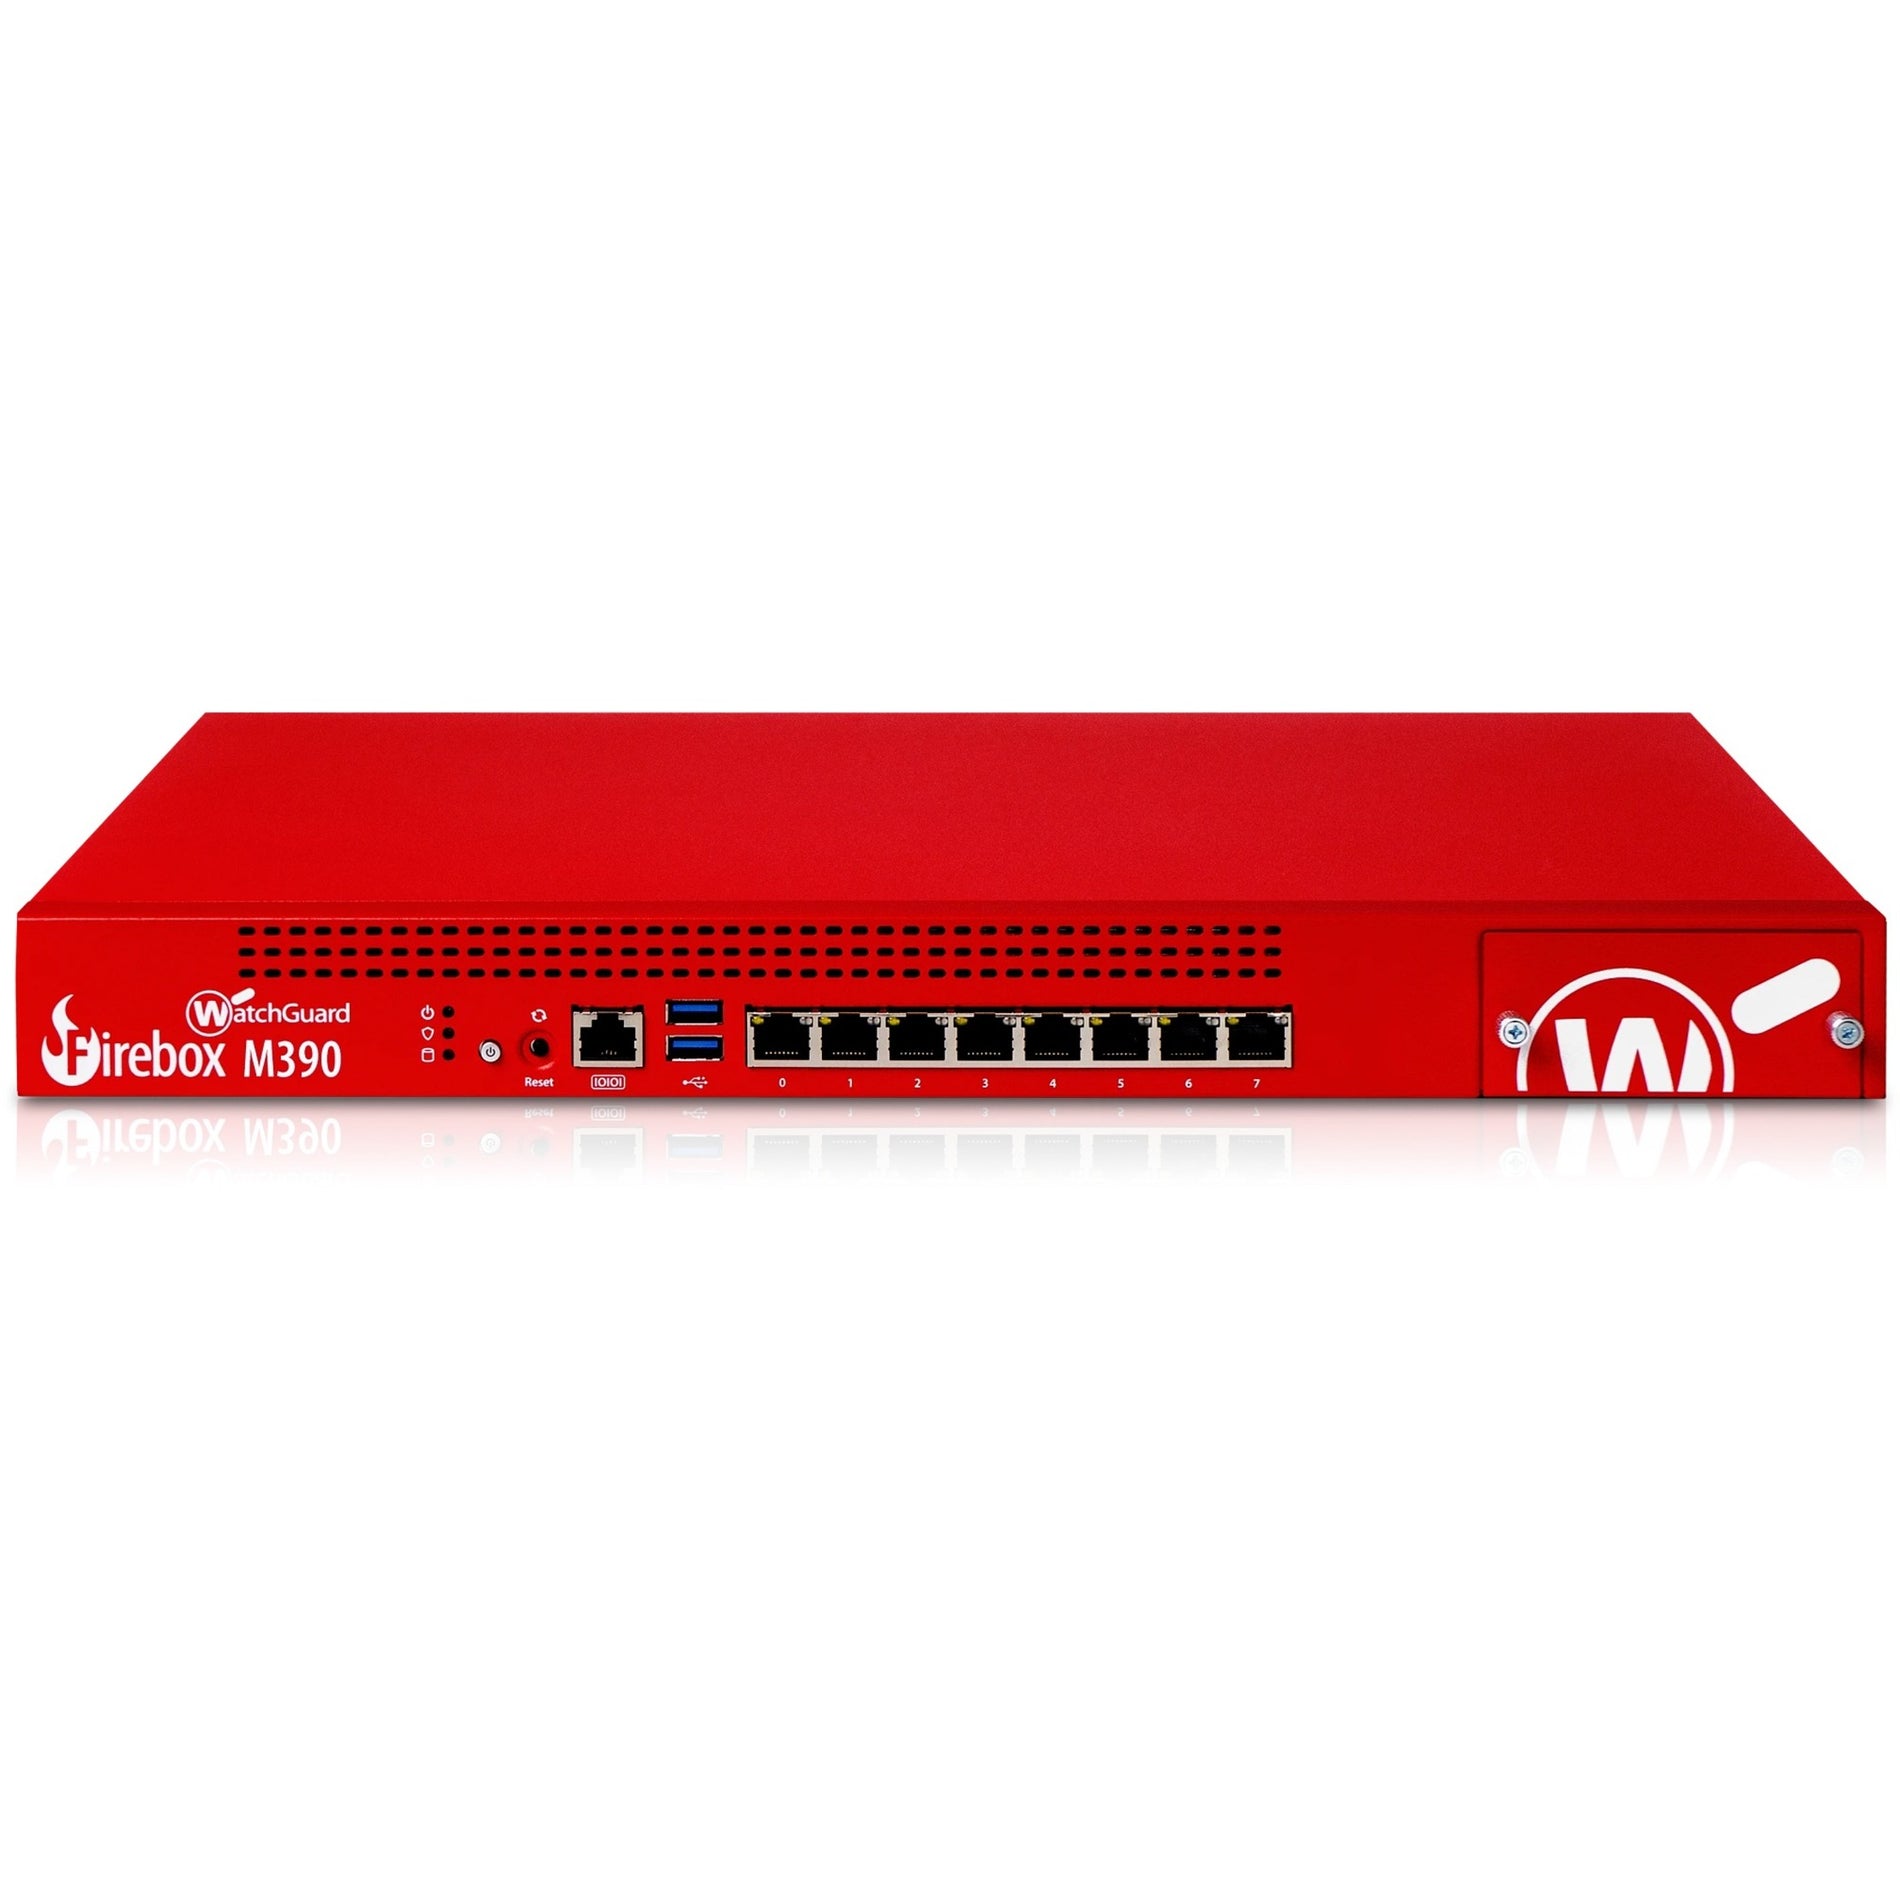 WatchGuard WGM39002101 Firebox M390 Network Security/Firewall Appliance, 8 Ports, 1 Year Total Security Suite